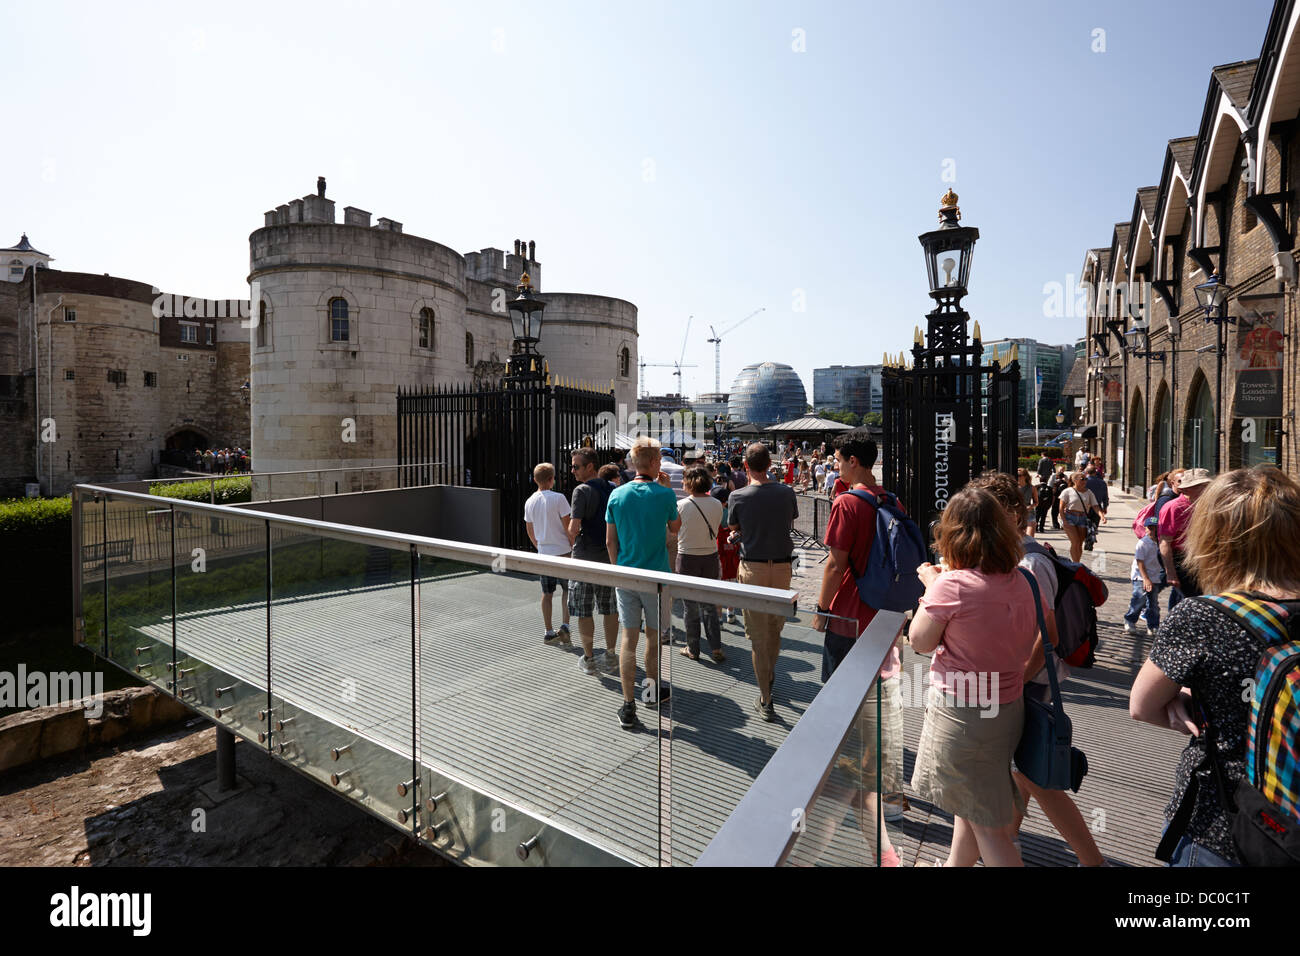 people queueing at the entrance to the tower of London England UK Stock Photo